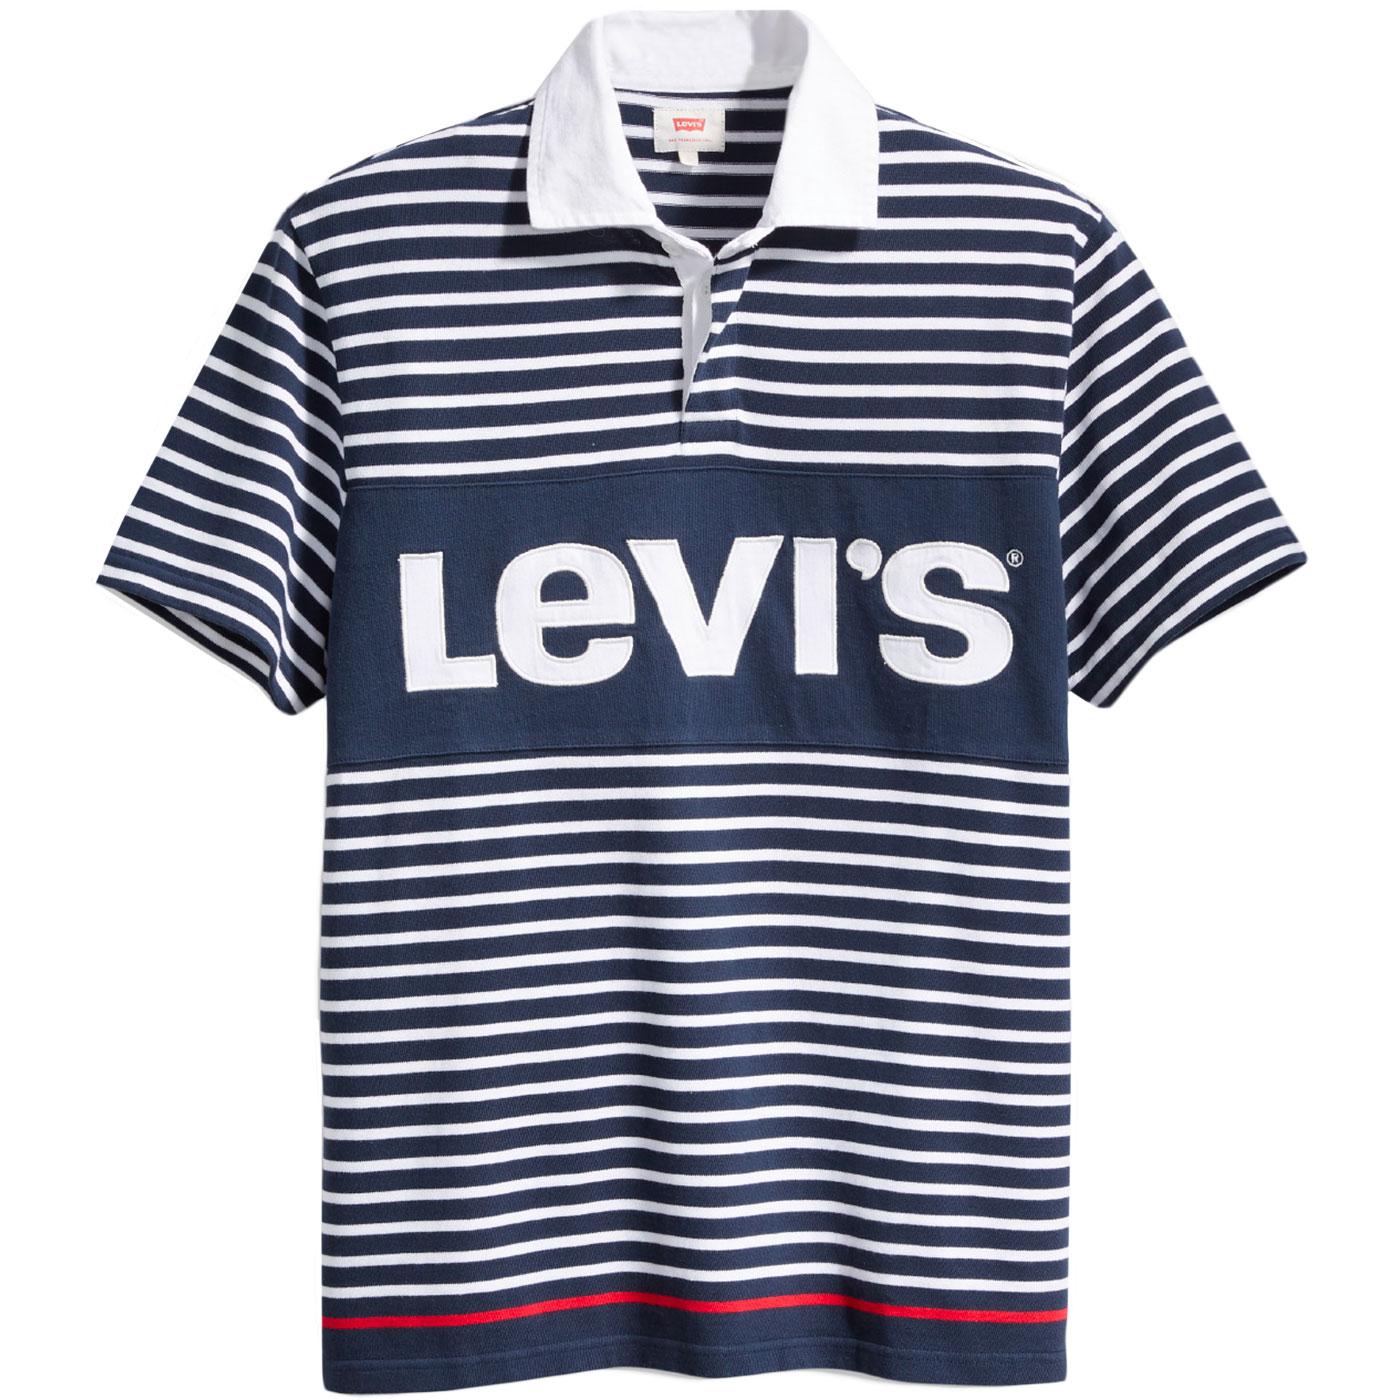 Mighty LEVI'S Men's Retro 70s Striped Rugby Polo